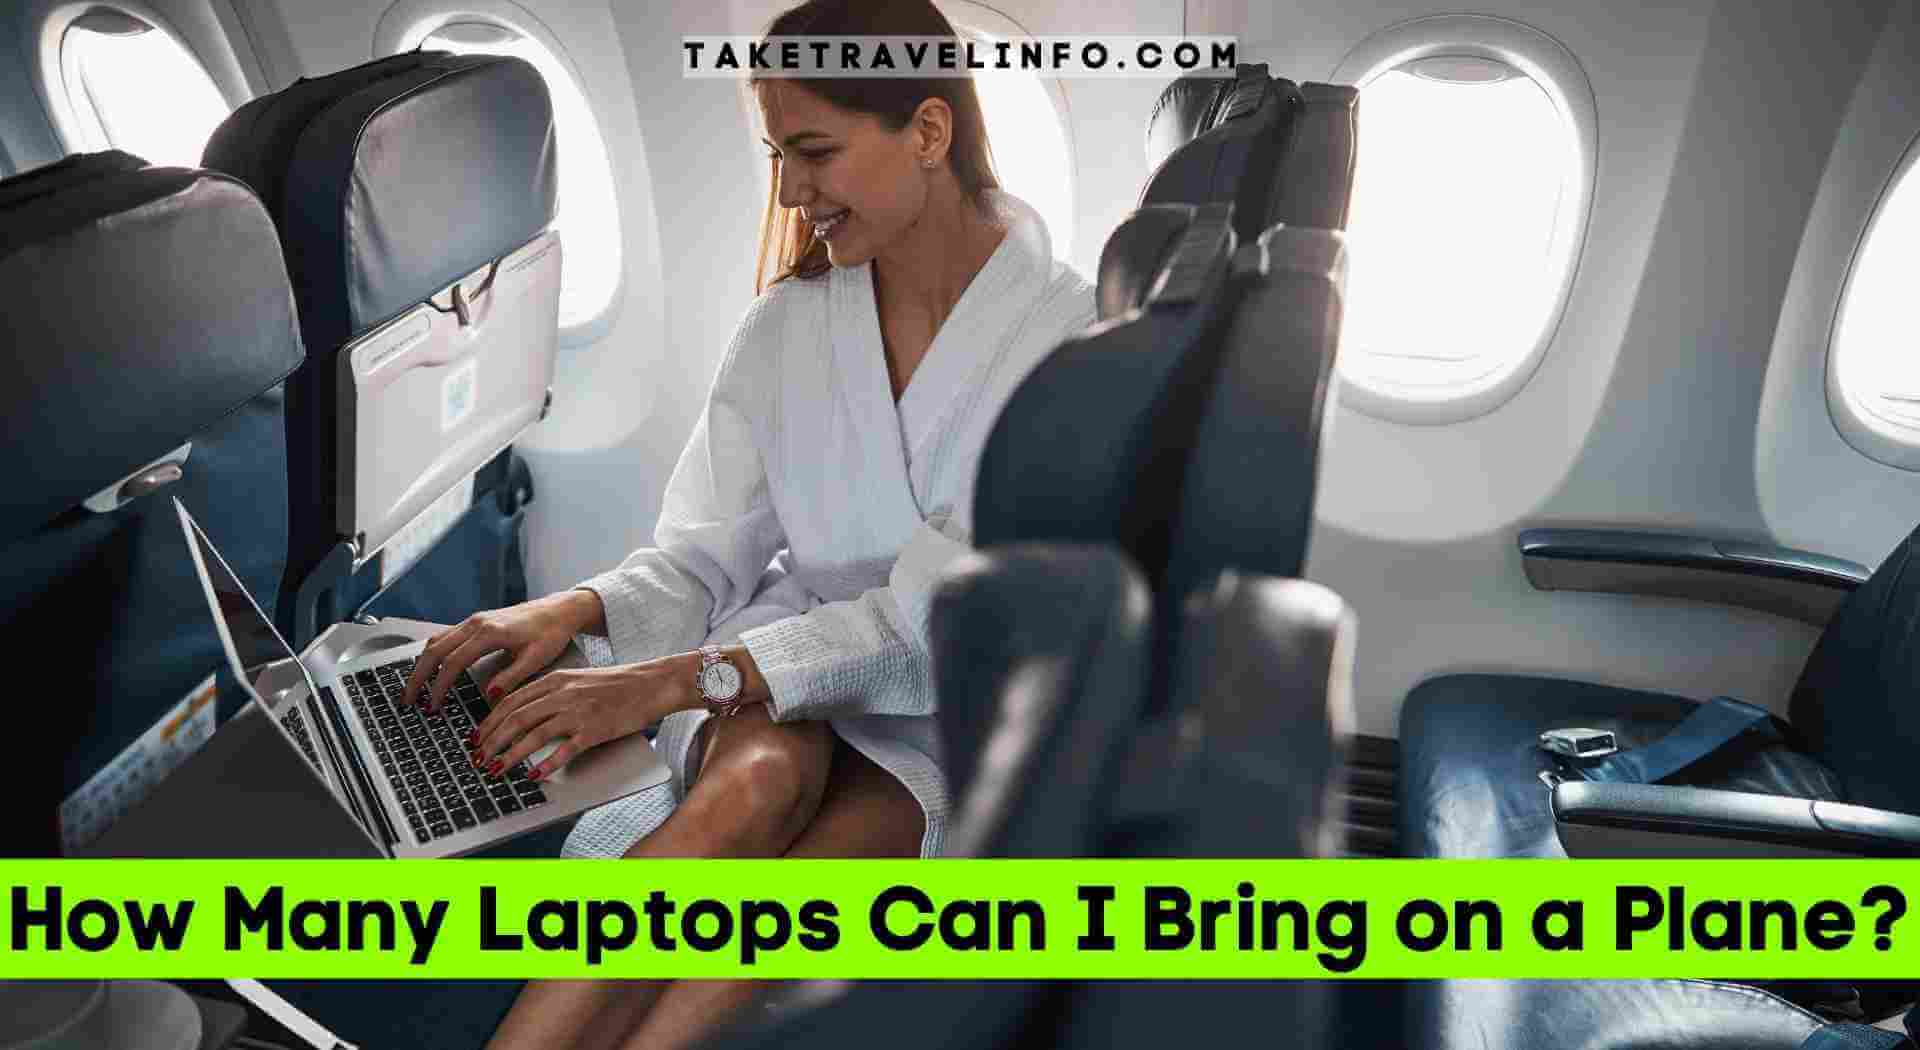 How Many Laptops Can I Bring on a Plane?